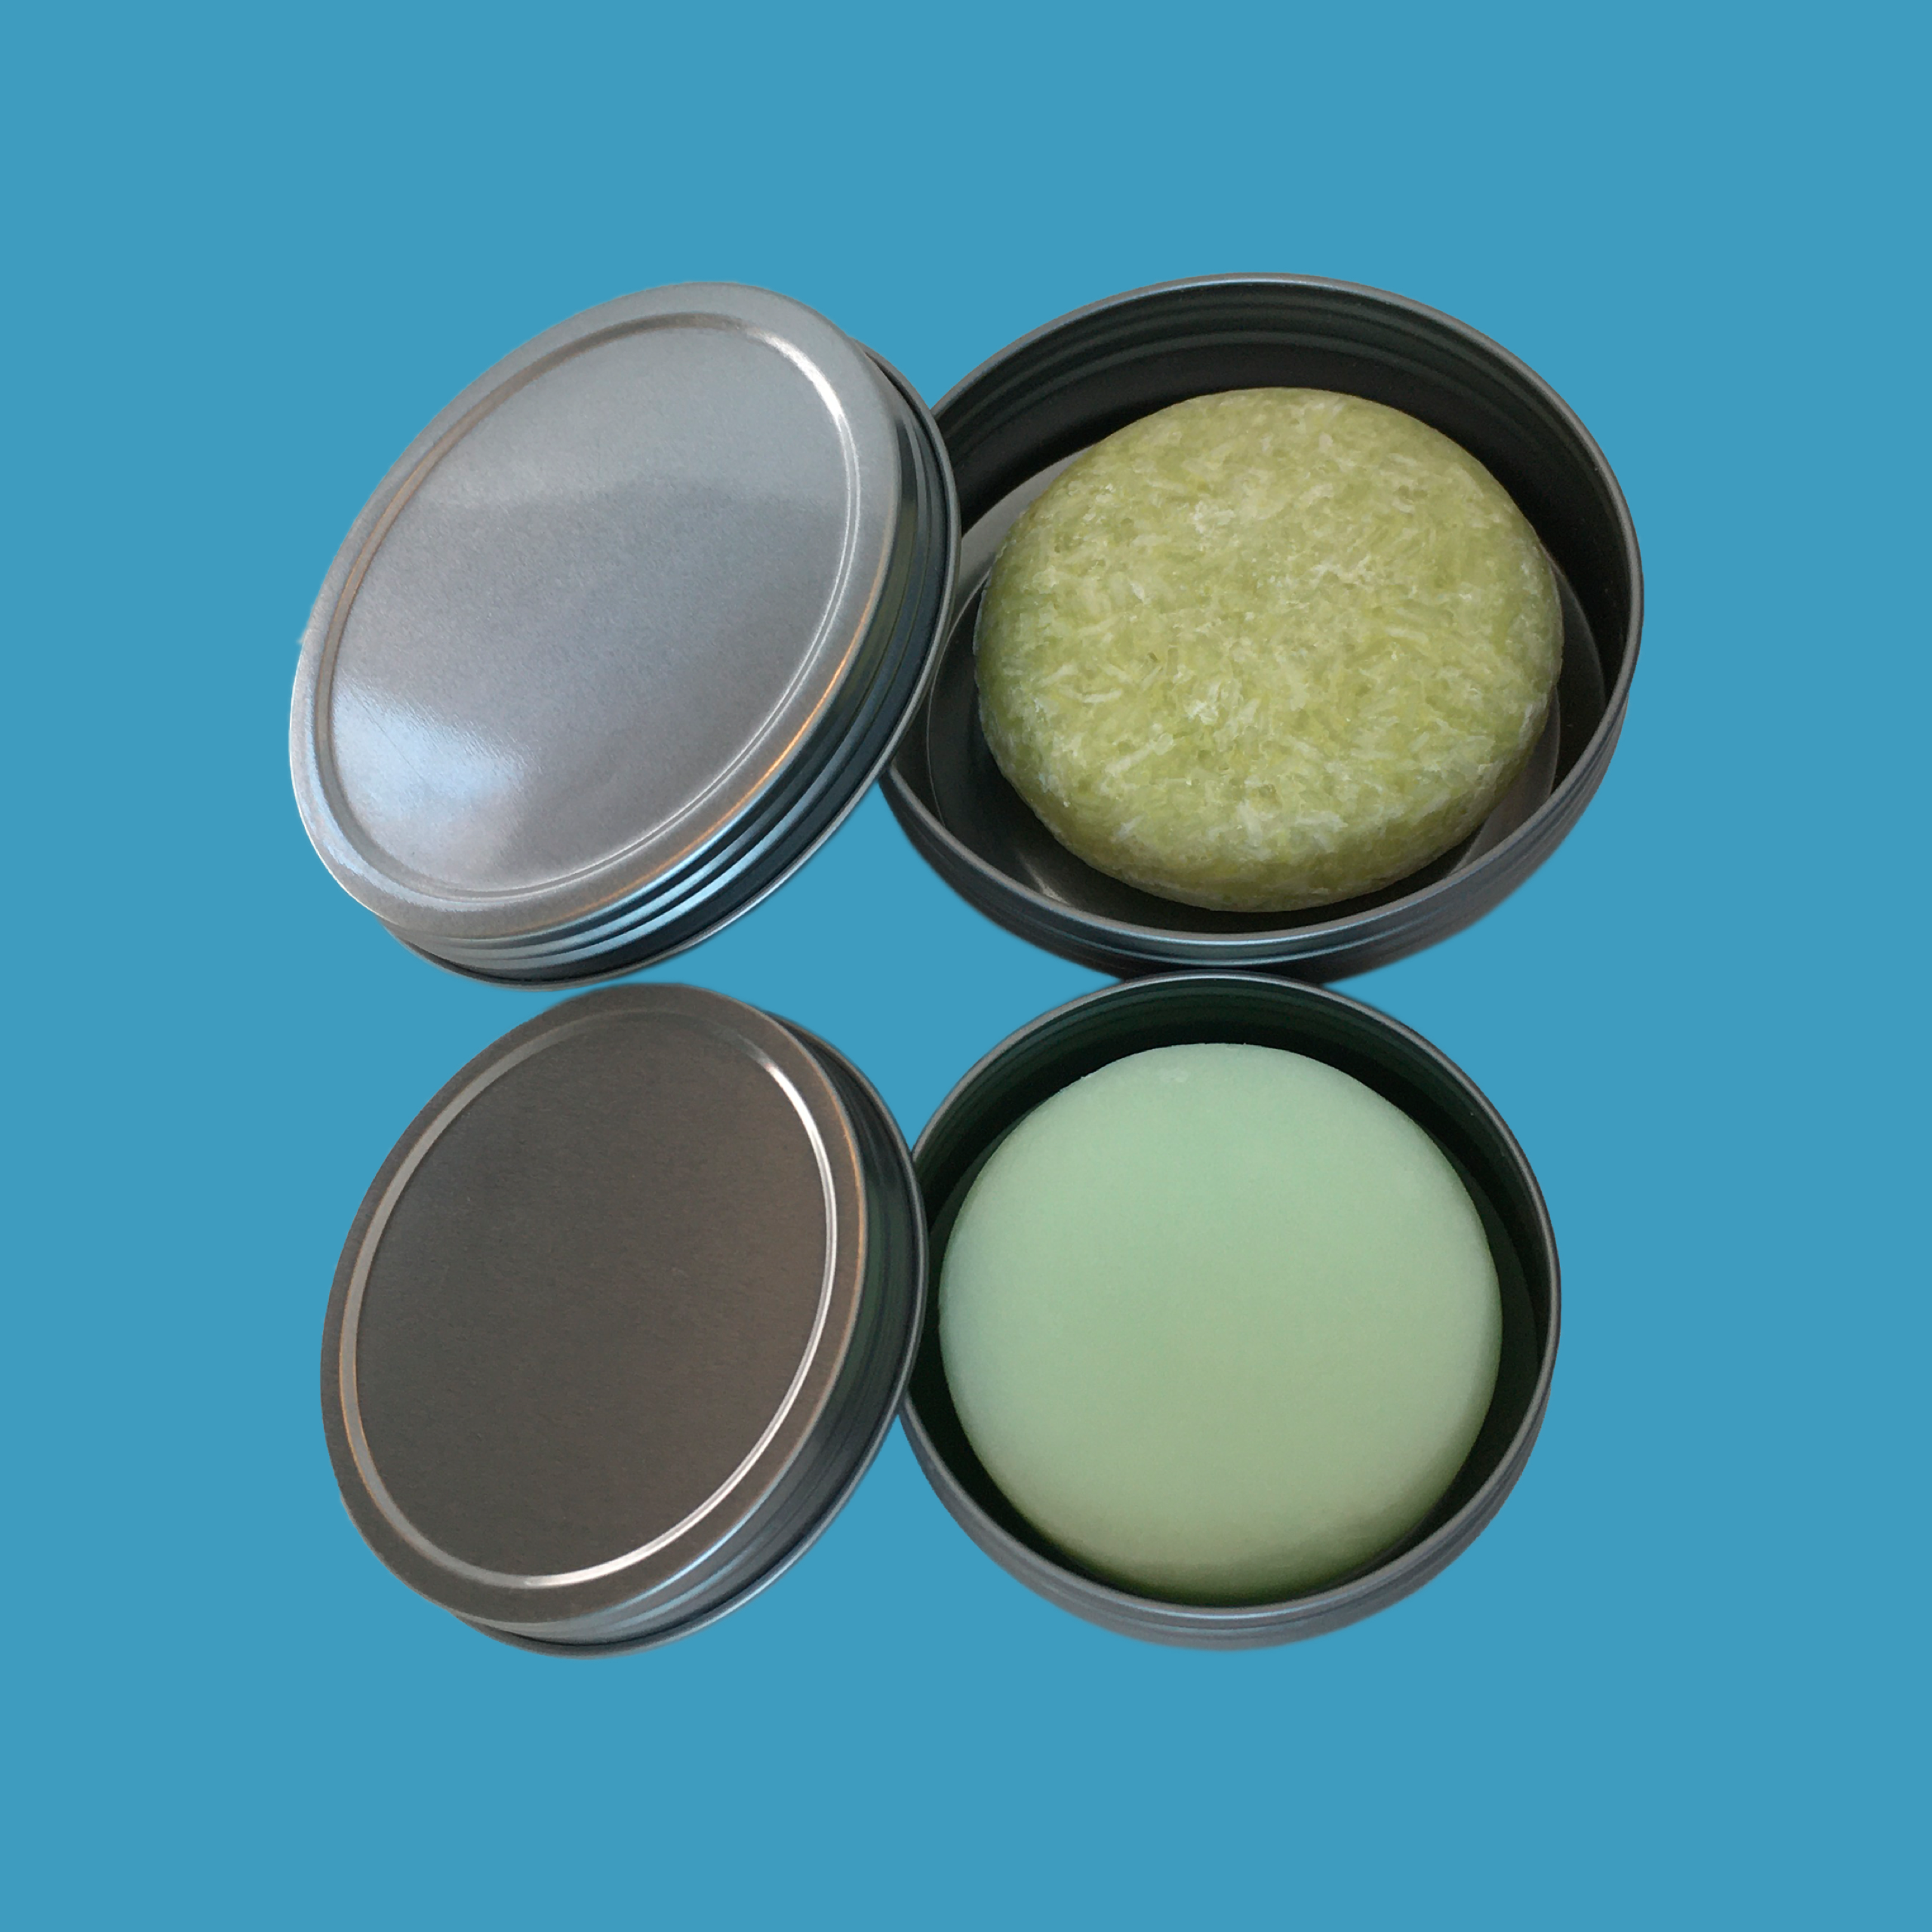 Two tins on blue background with Green Ablutions zero waste sustainable plastic free shampoo and conditioner for travel, camping or home use by the whole family. 